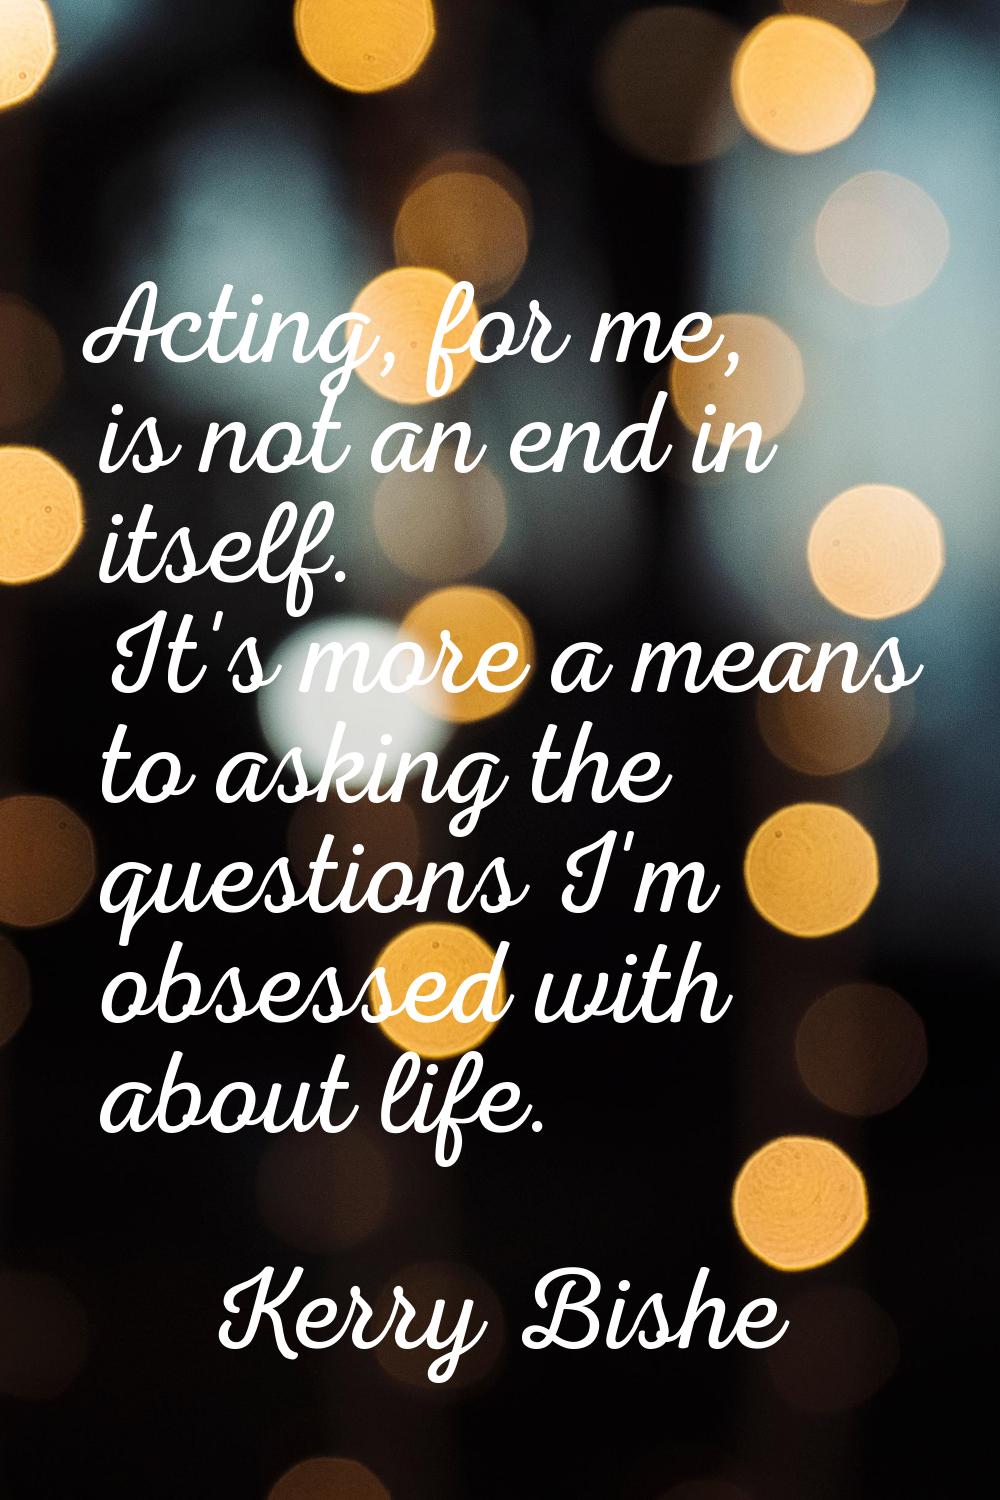 Acting, for me, is not an end in itself. It's more a means to asking the questions I'm obsessed wit